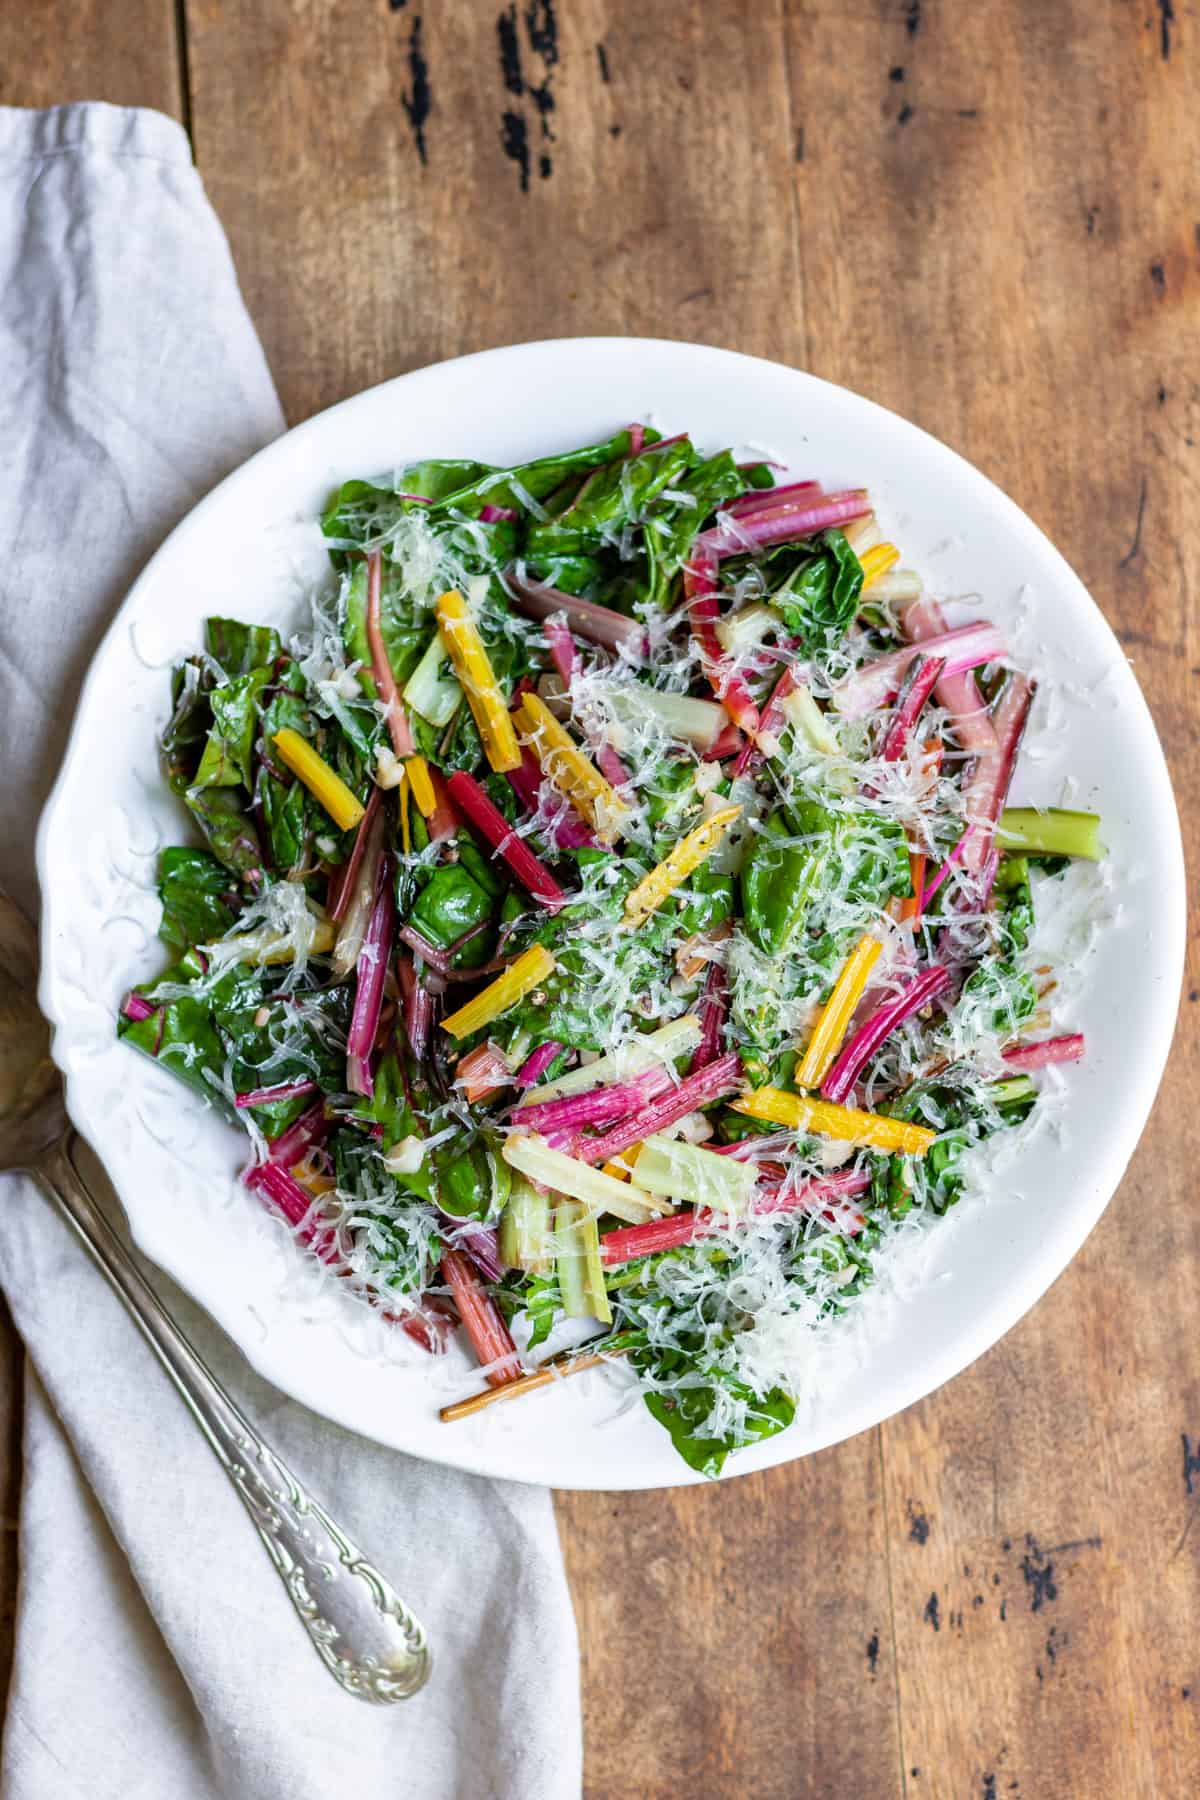 Table with a serving dish of sauteed rainbow chard.